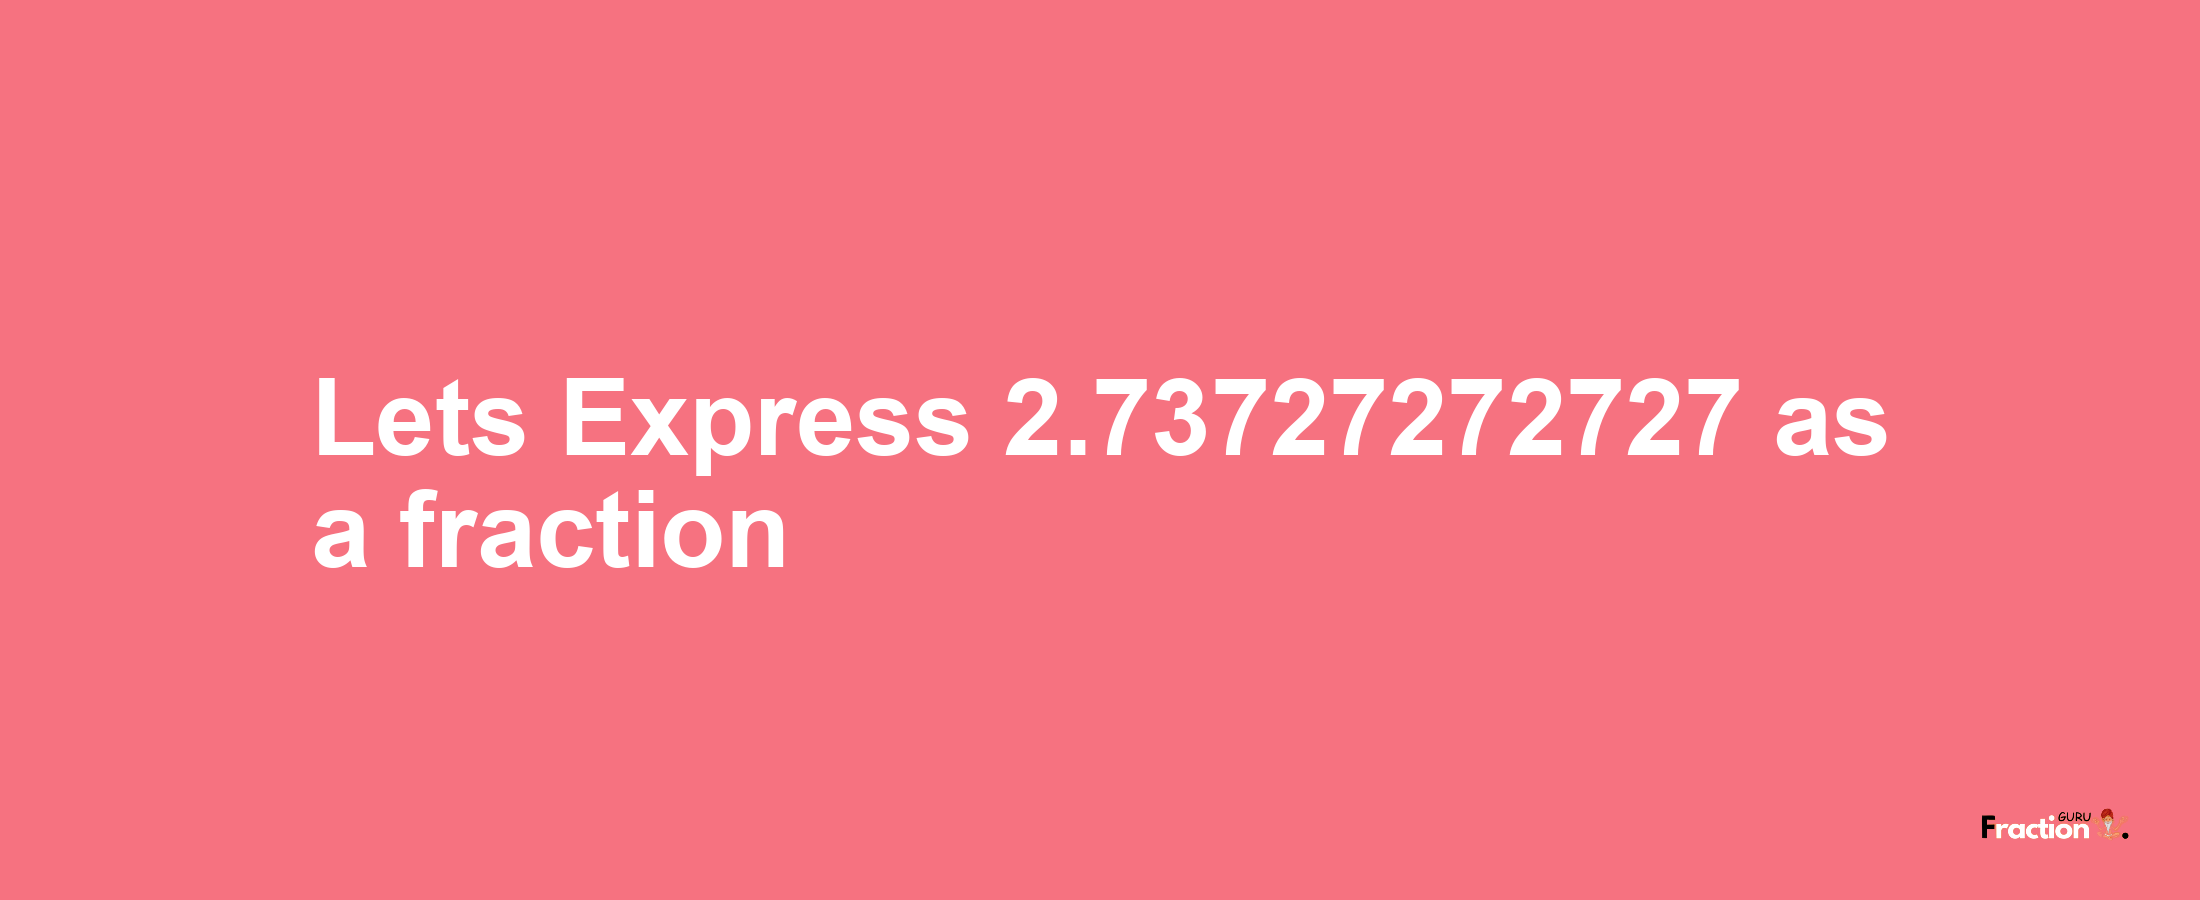 Lets Express 2.73727272727 as afraction